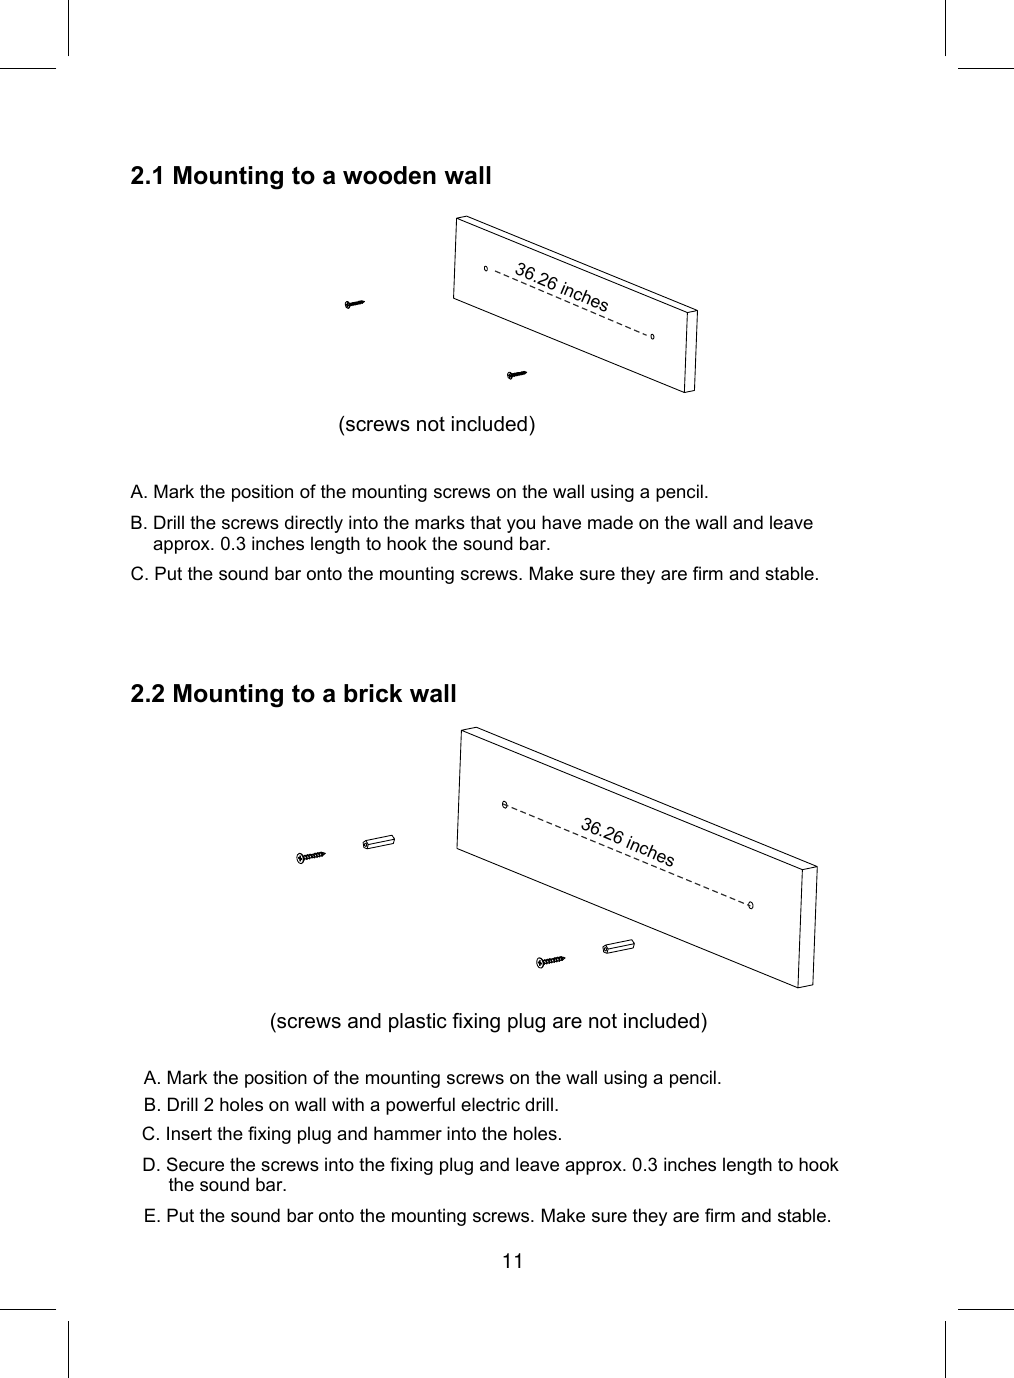 2.1 Mountingto a wooden wallA. Mark the position of the mounting screws on the wall using a pencil.C. Put the sound bar onto the mounting screws. Make sure they are firm and stable.2.2 Mountingto a brick wall36.26 inchesB. Drill the screws directly into the marks that you have made on the wall and leave approx. 0.3 inches length to hook the sound bar.(screws not included)(screws and plastic fixing plug are not included)A. Mark the position of the mounting screws on the wall using a pencil.E. Put the sound bar onto the mounting screws. Make sure they are firm and stable.C. Insert the fixing plug and hammer into the holes.D. Secure the screws into the fixing plug and leave approx. 0.3 inches length to hookthe sound bar.B. Drill 2 holes on wall with a powerful electric drill. 36.26 inches11